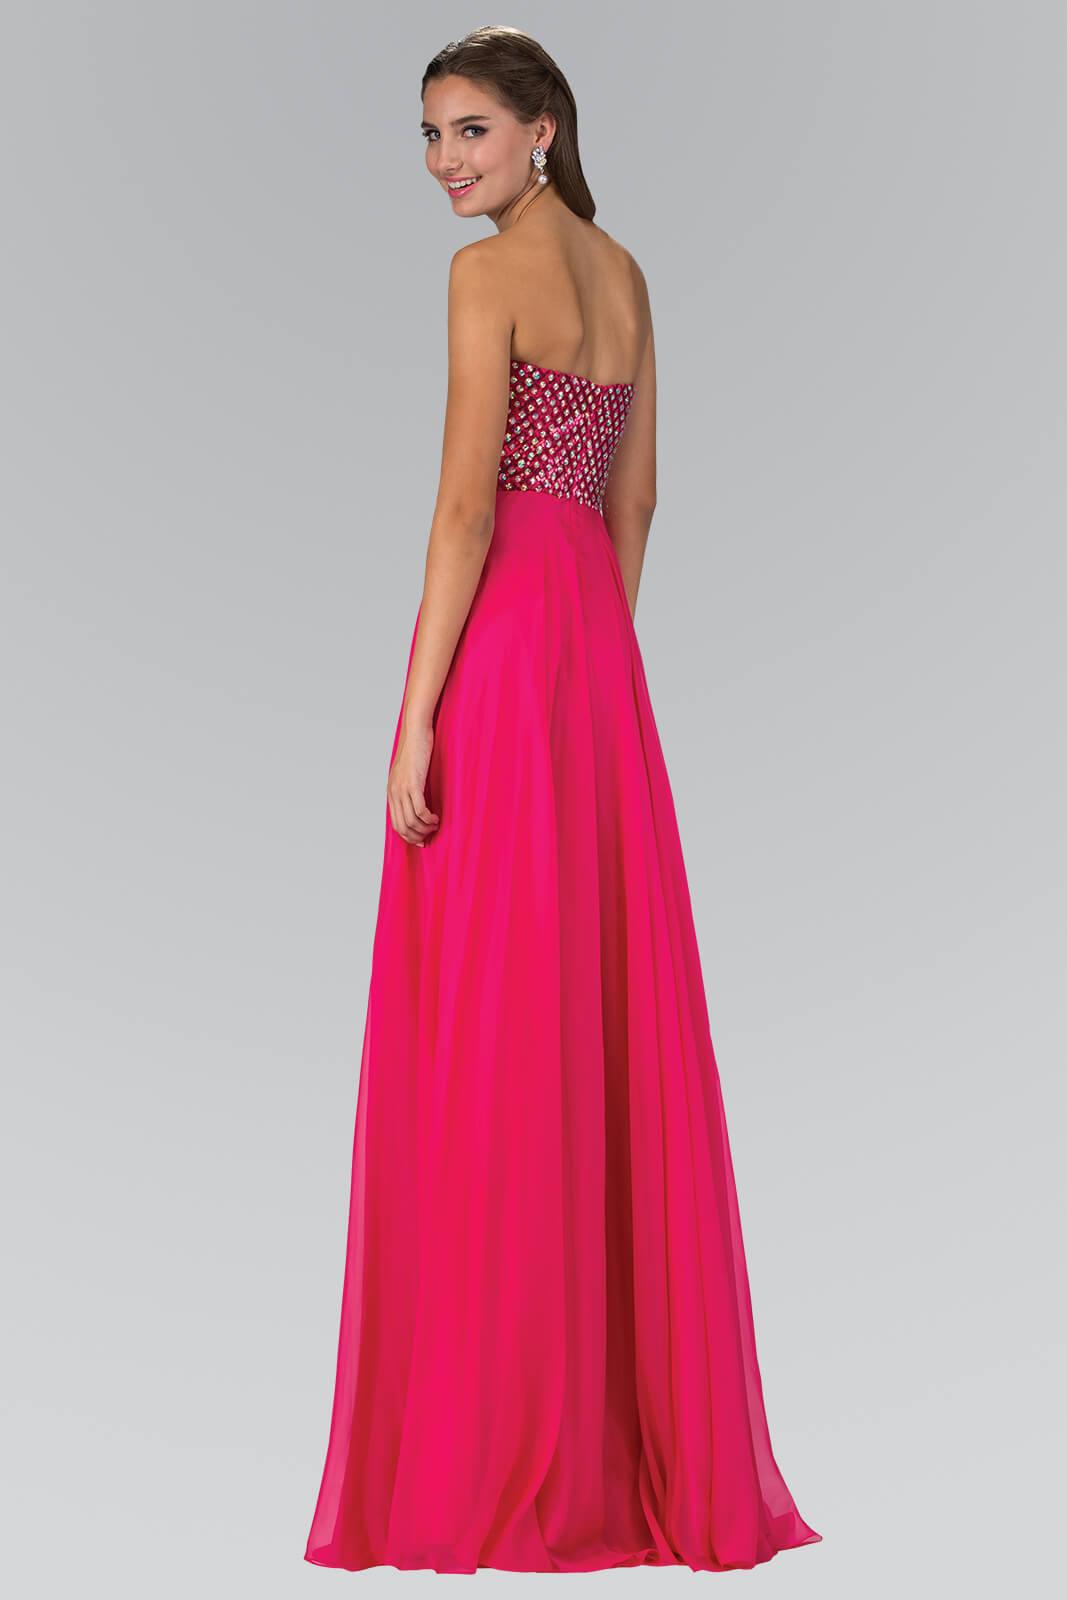 Prom Long Strapless Chiffon Sweetheart Formal Gown - The Dress Outlet Elizabeth K